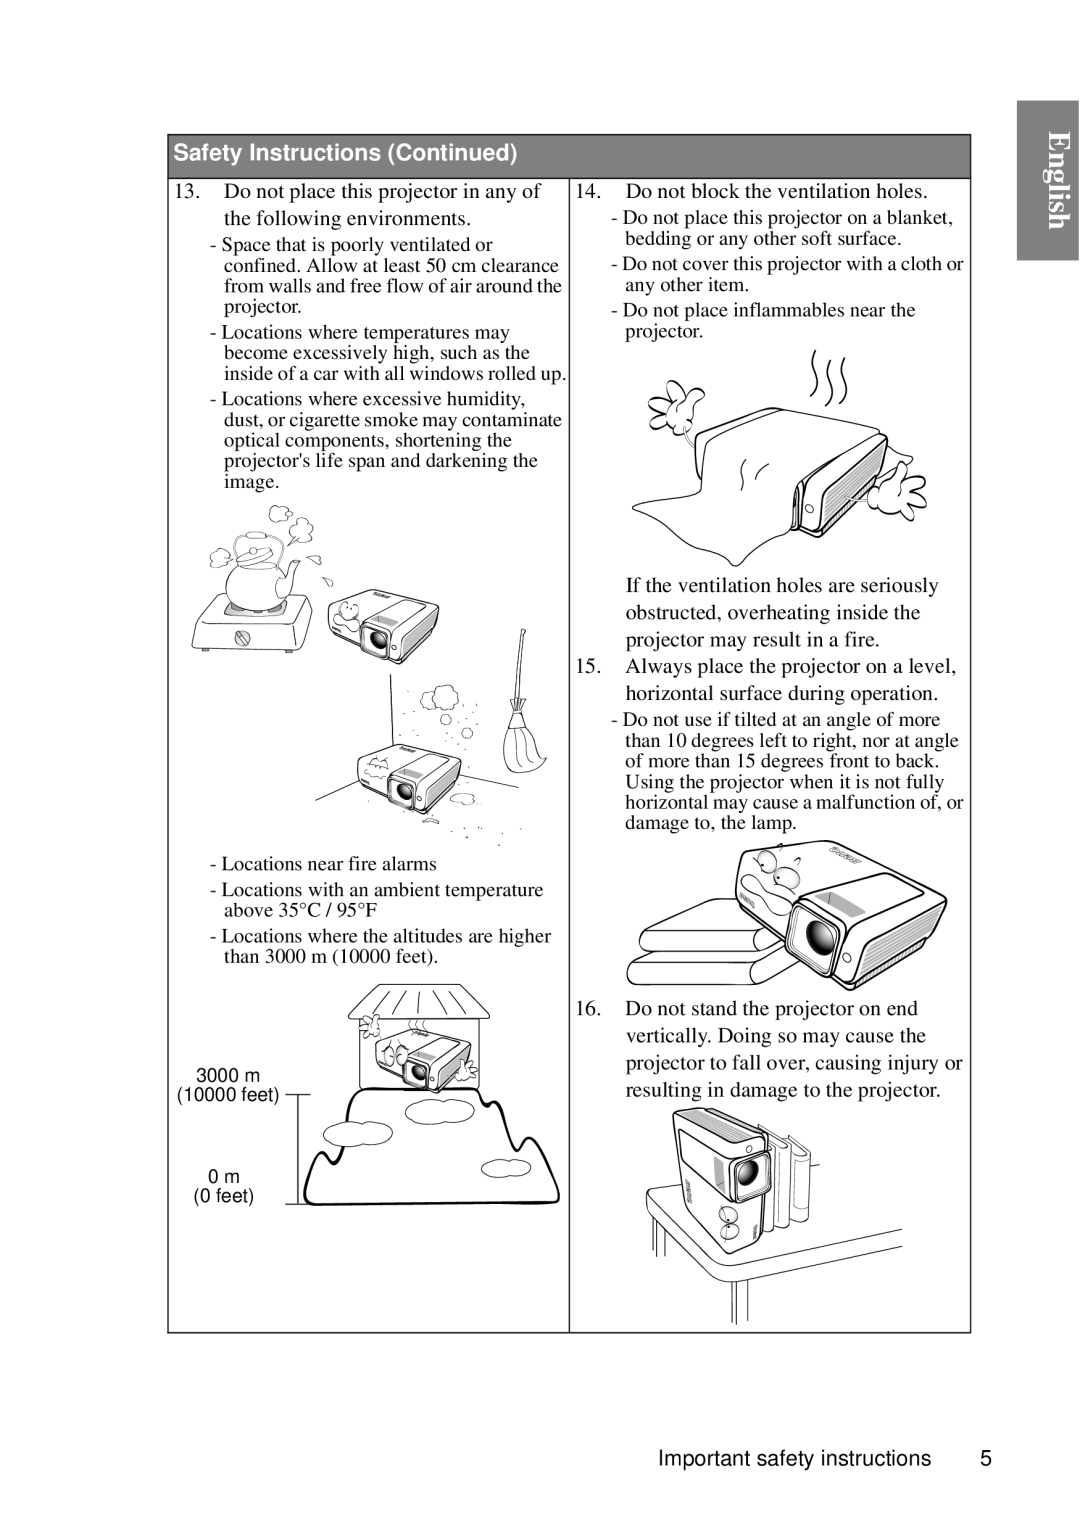 BenQ MP727, MP735 English, Safety Instructions Continued, Do not place this projector in any of the following environments 